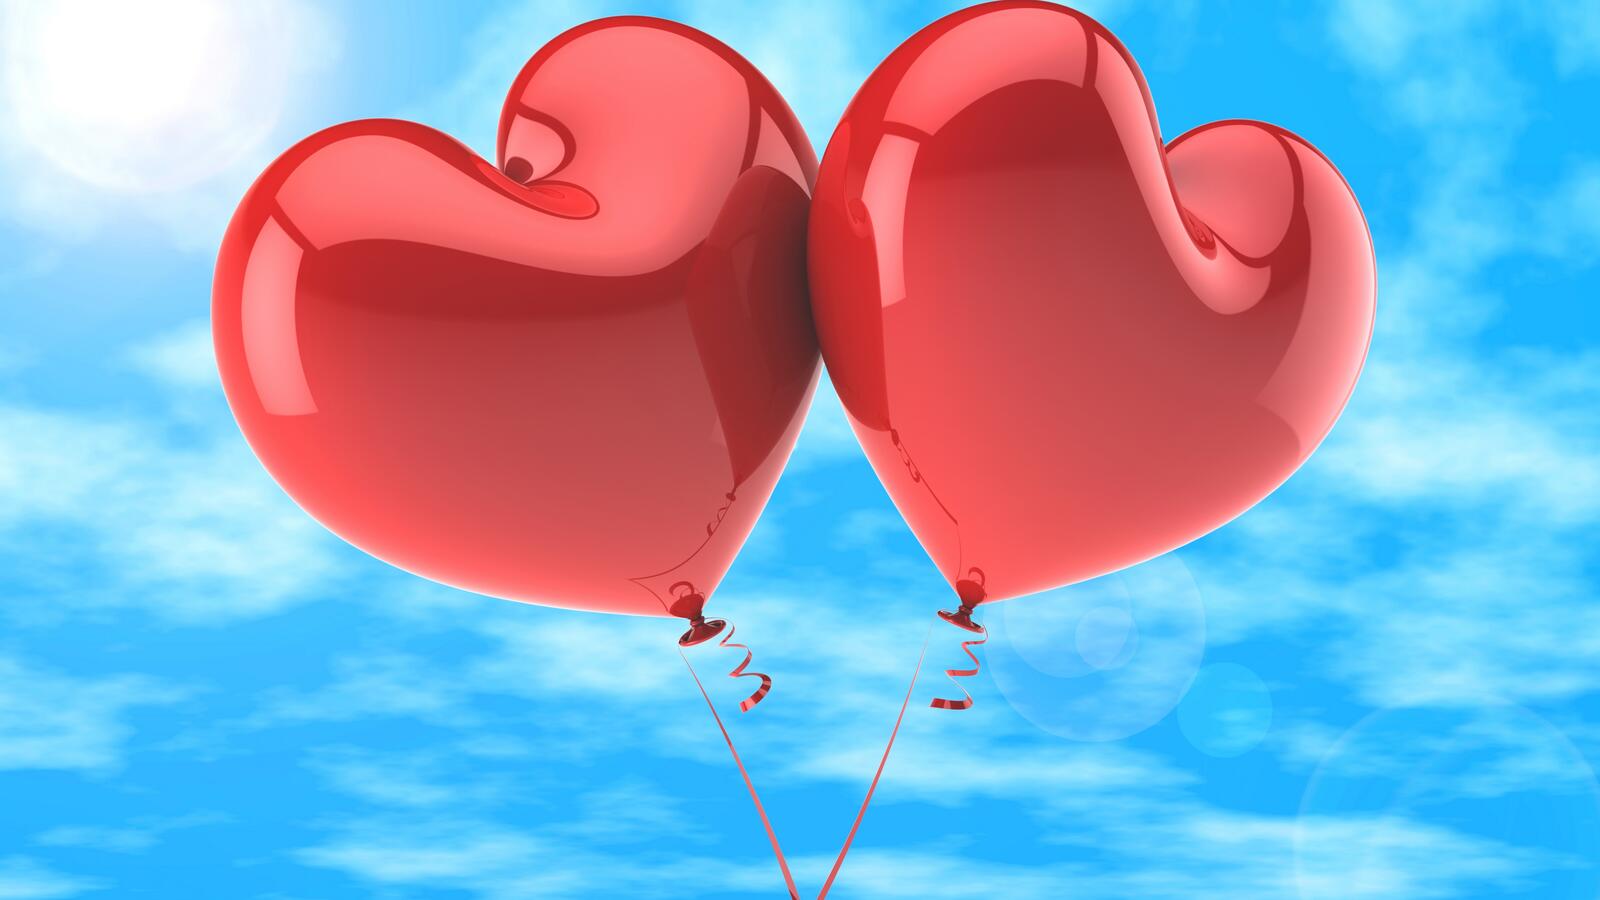 Free photo Two heart-shaped balloons against the sky